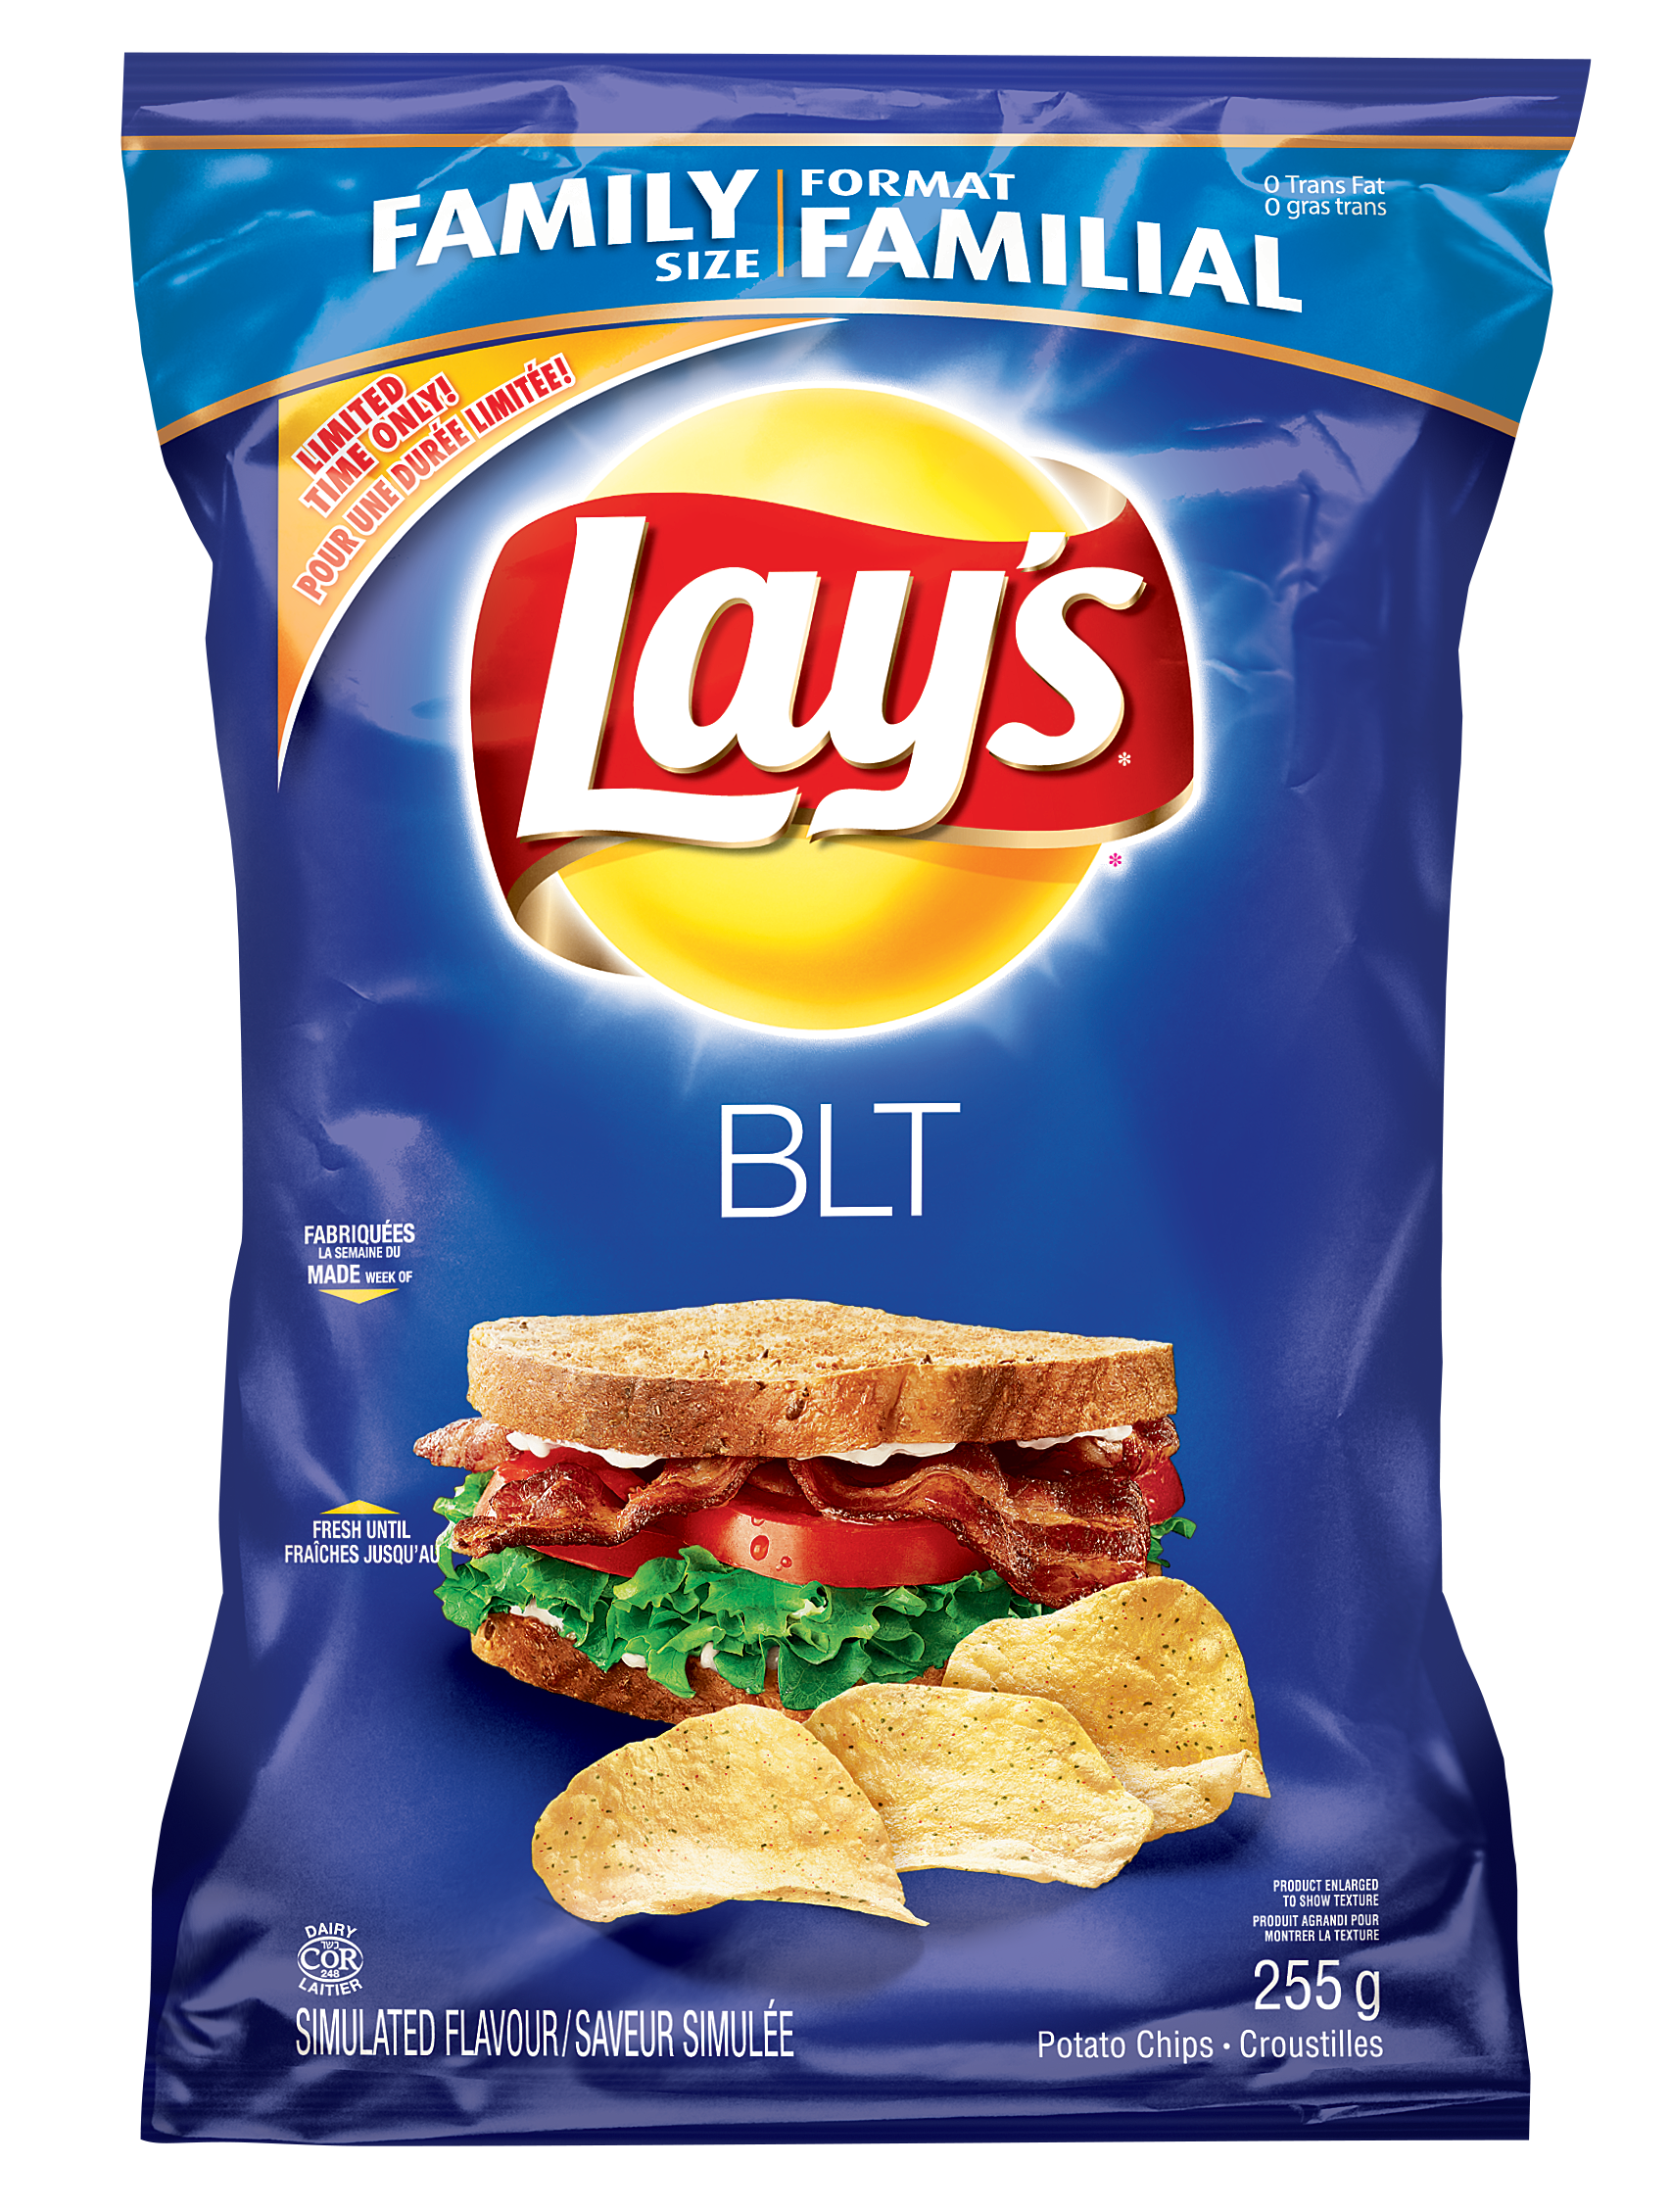 Crunchy Chips Lays HD Image Free PNG Image